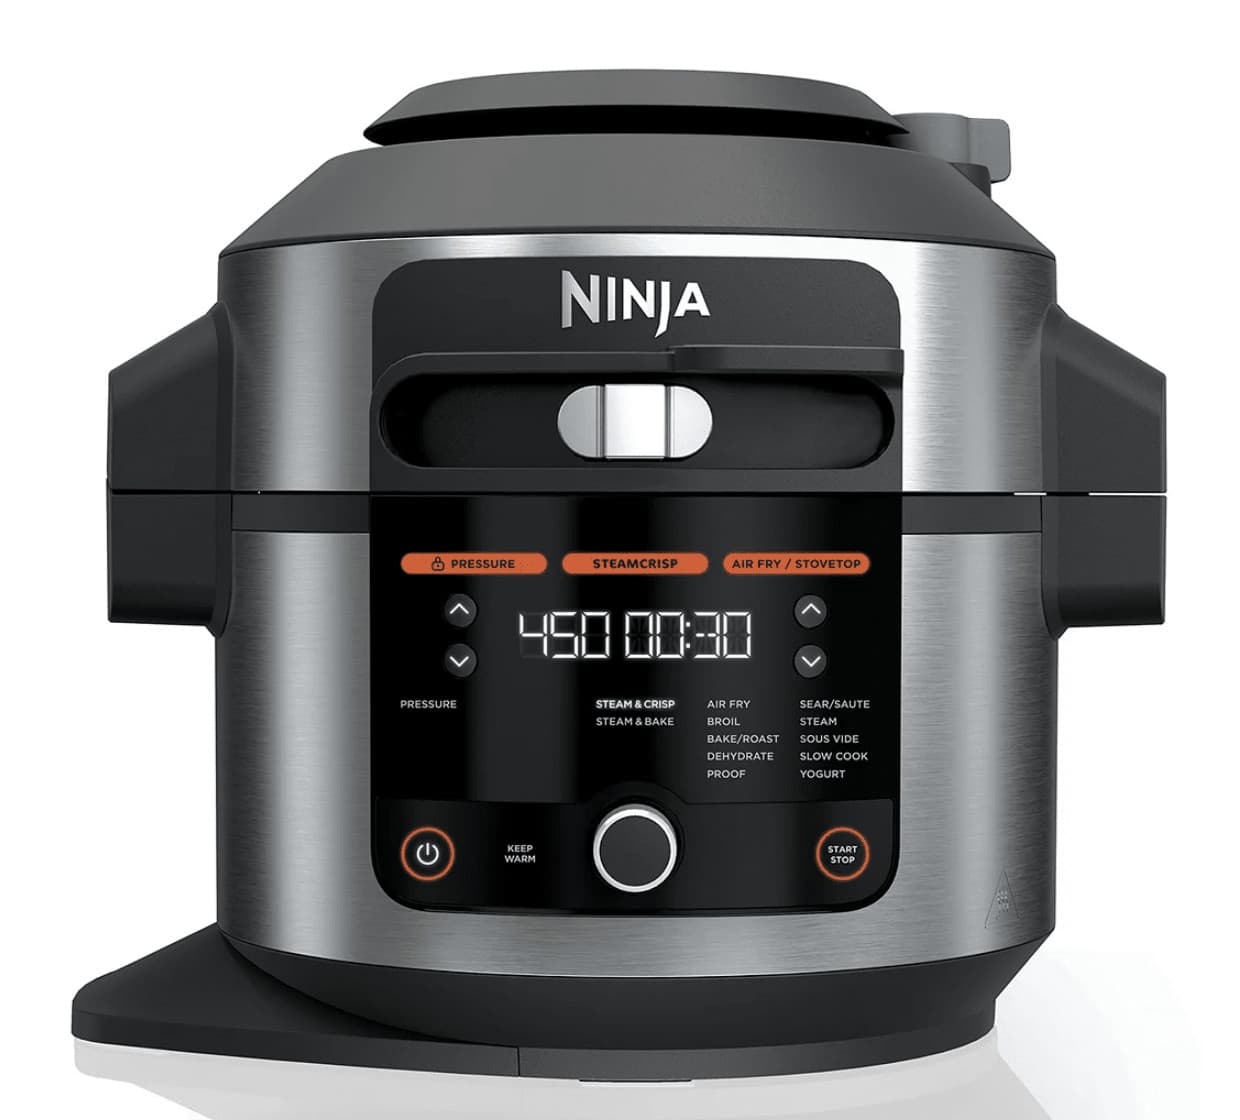 Instant Pot vs the Ninja Foodi Review - Mommy Hates Cooking